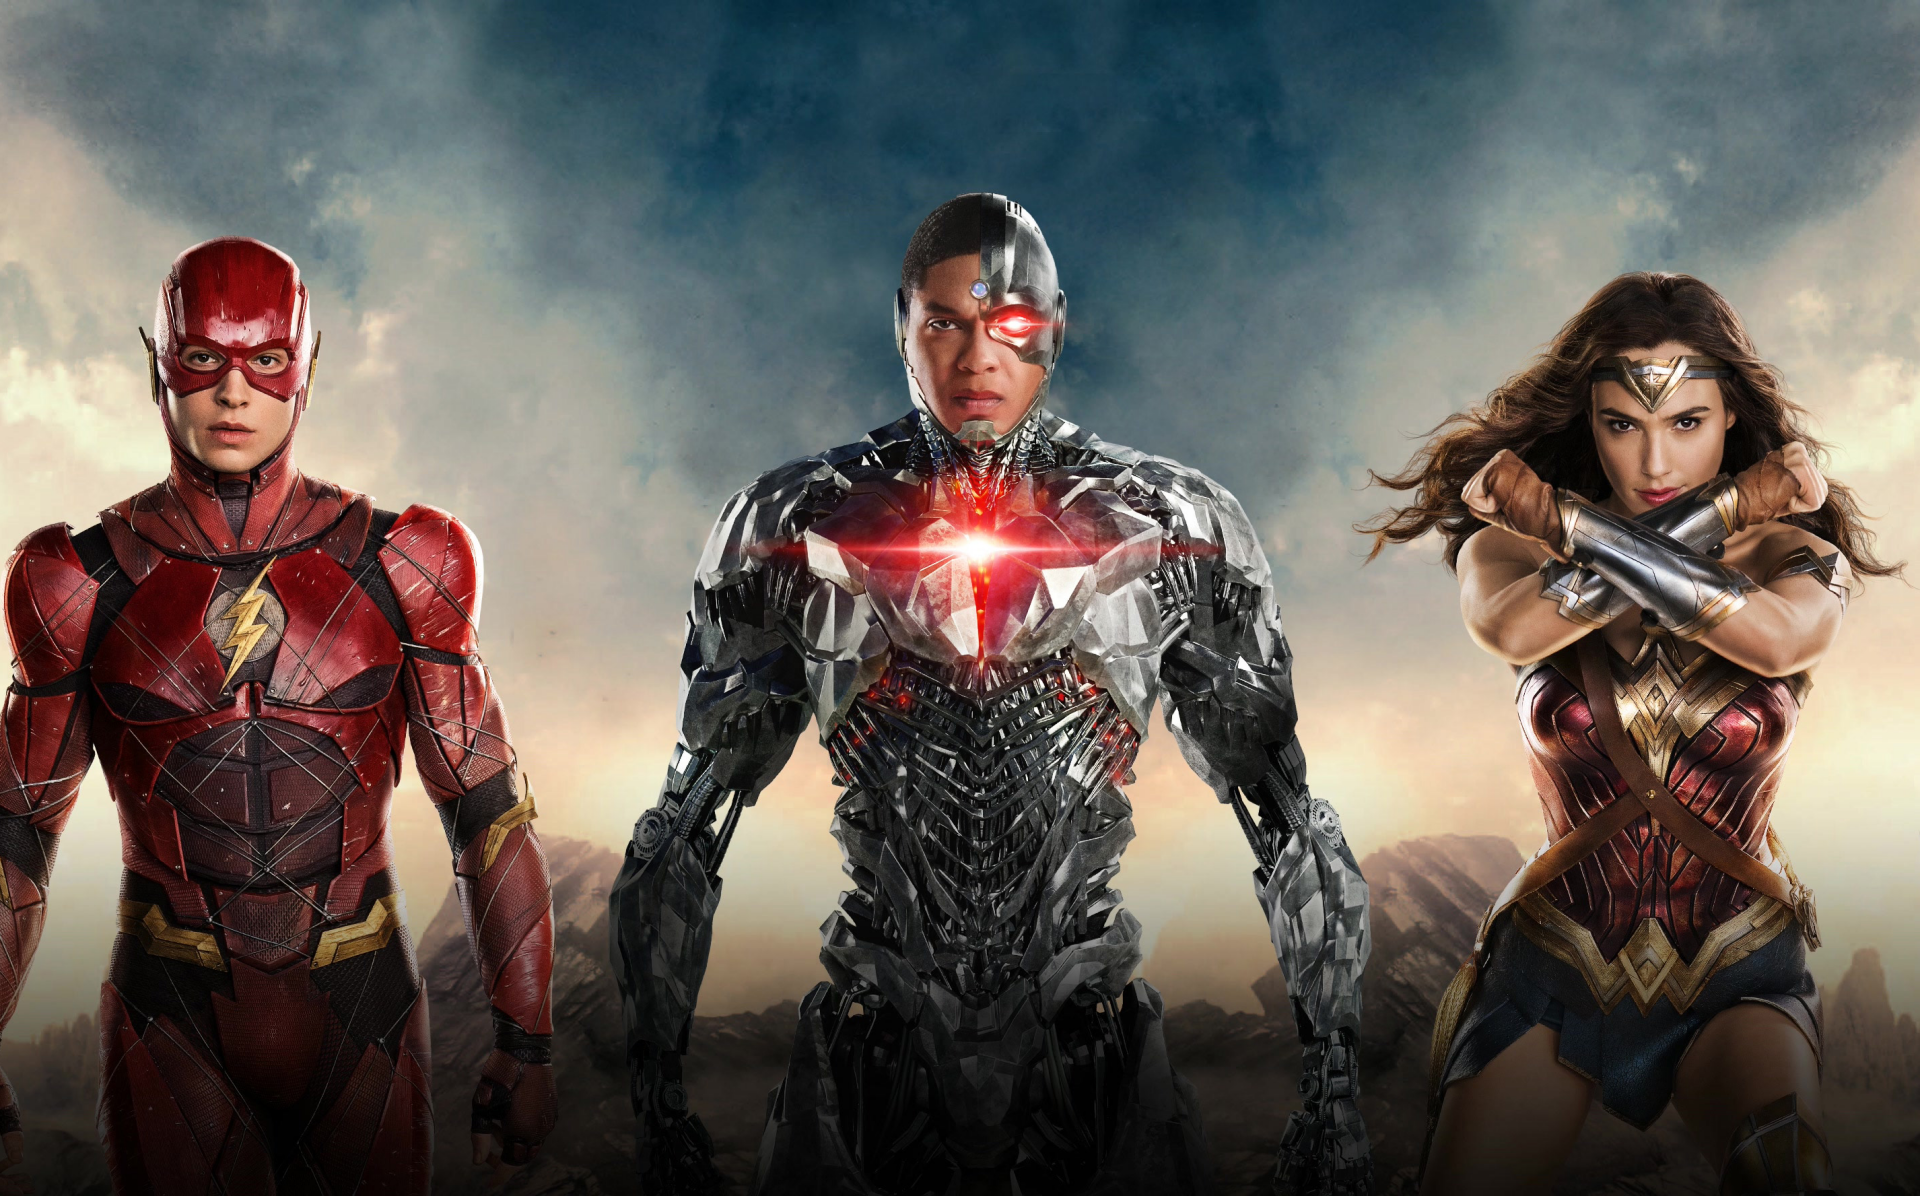  Justice  League  HD  Wallpaper  Background Image 2852x1776 